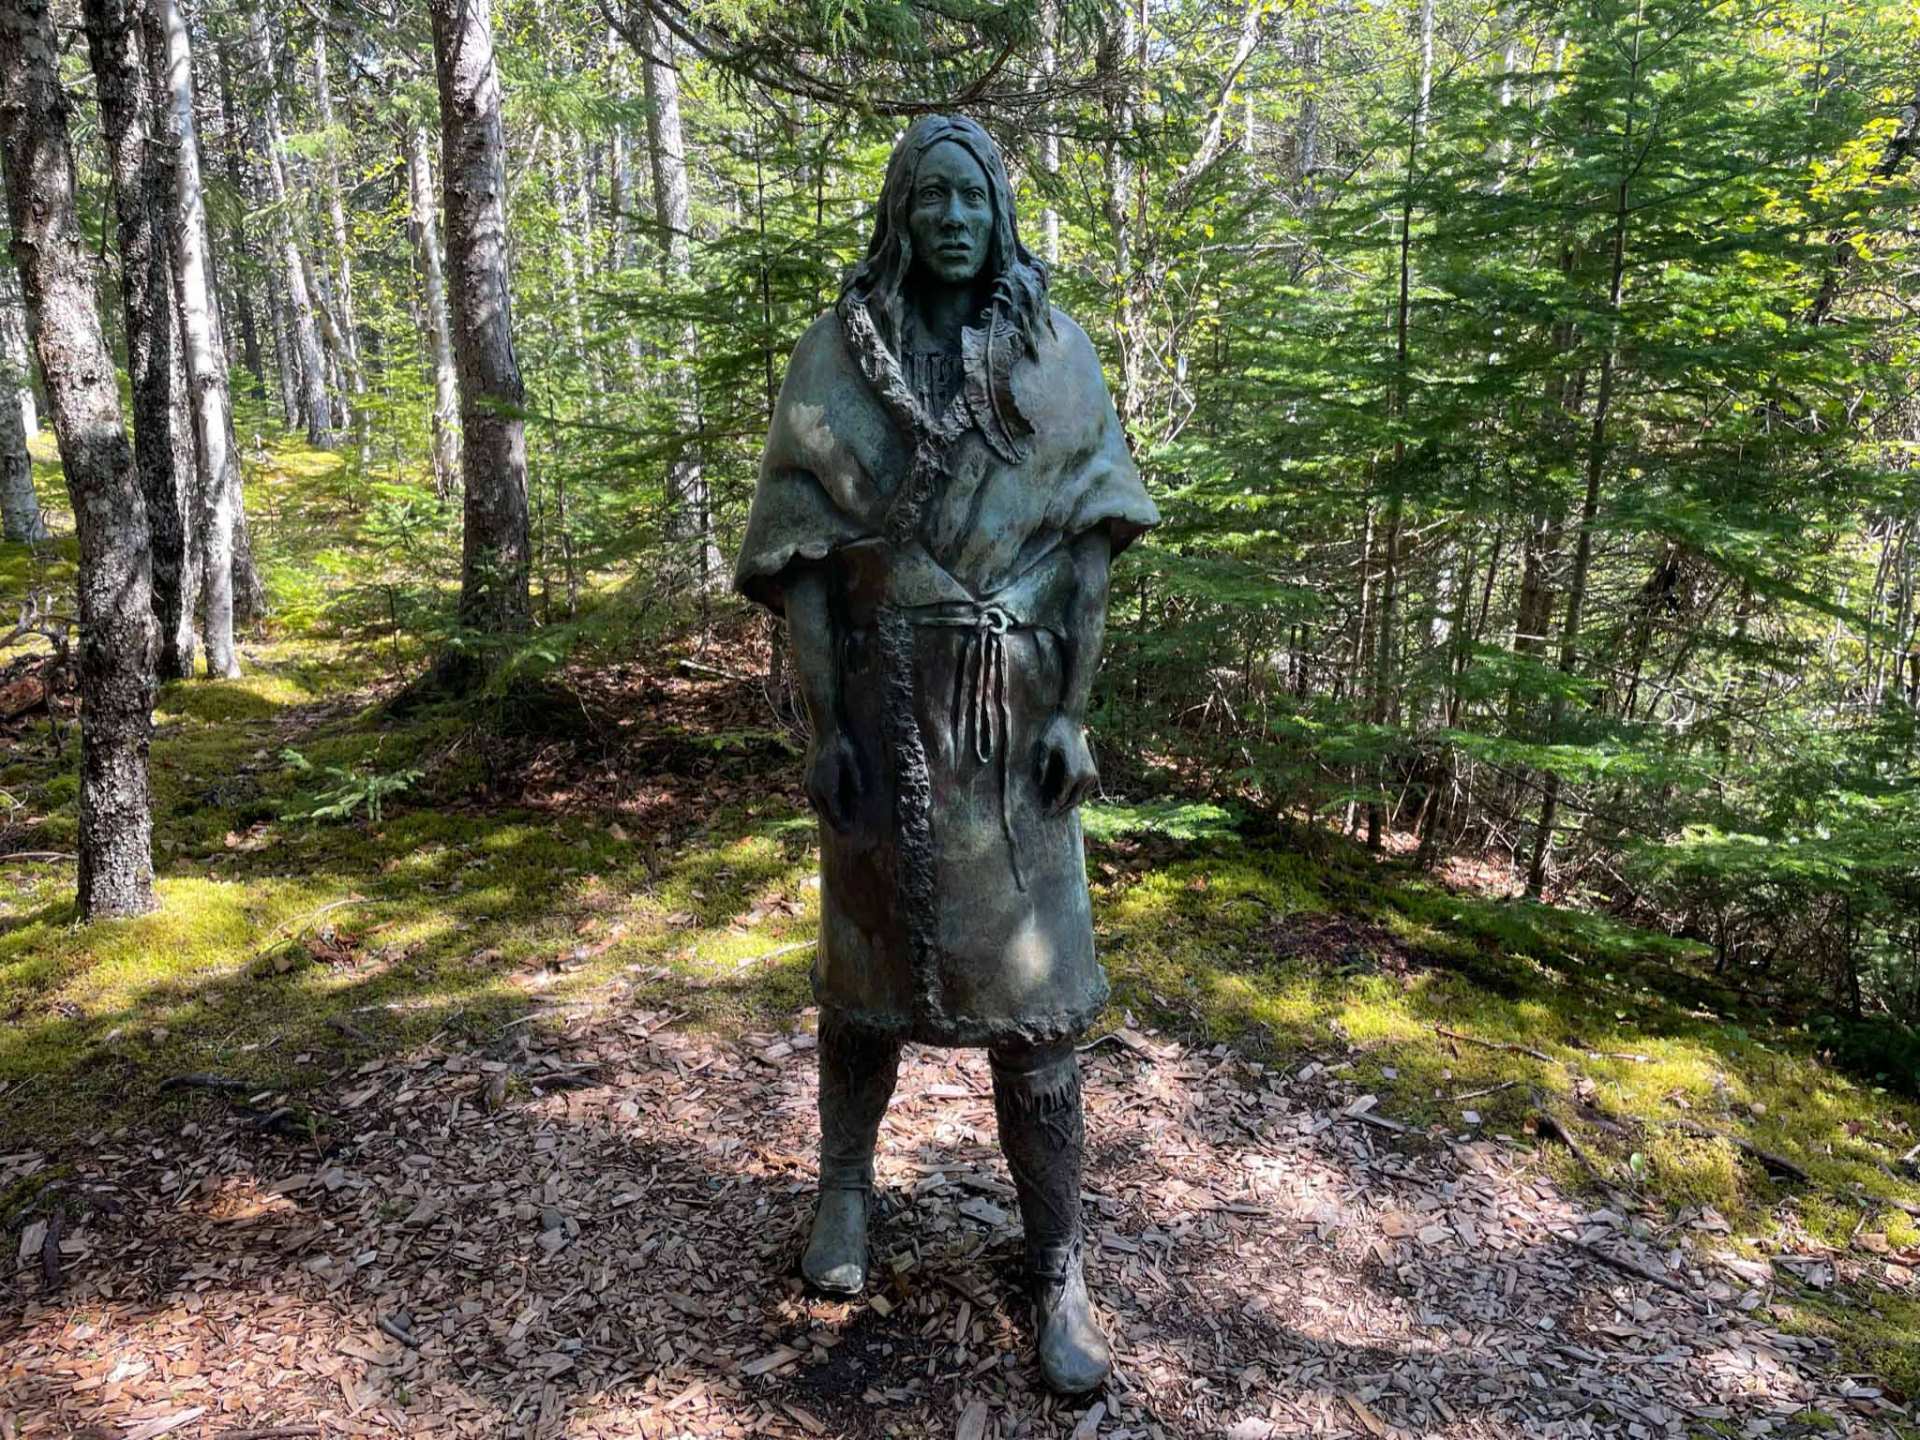 Newfoundland travel | The sculpture in the woods at the Beothuk Interpretation Centre in Newfoundland and Labrador